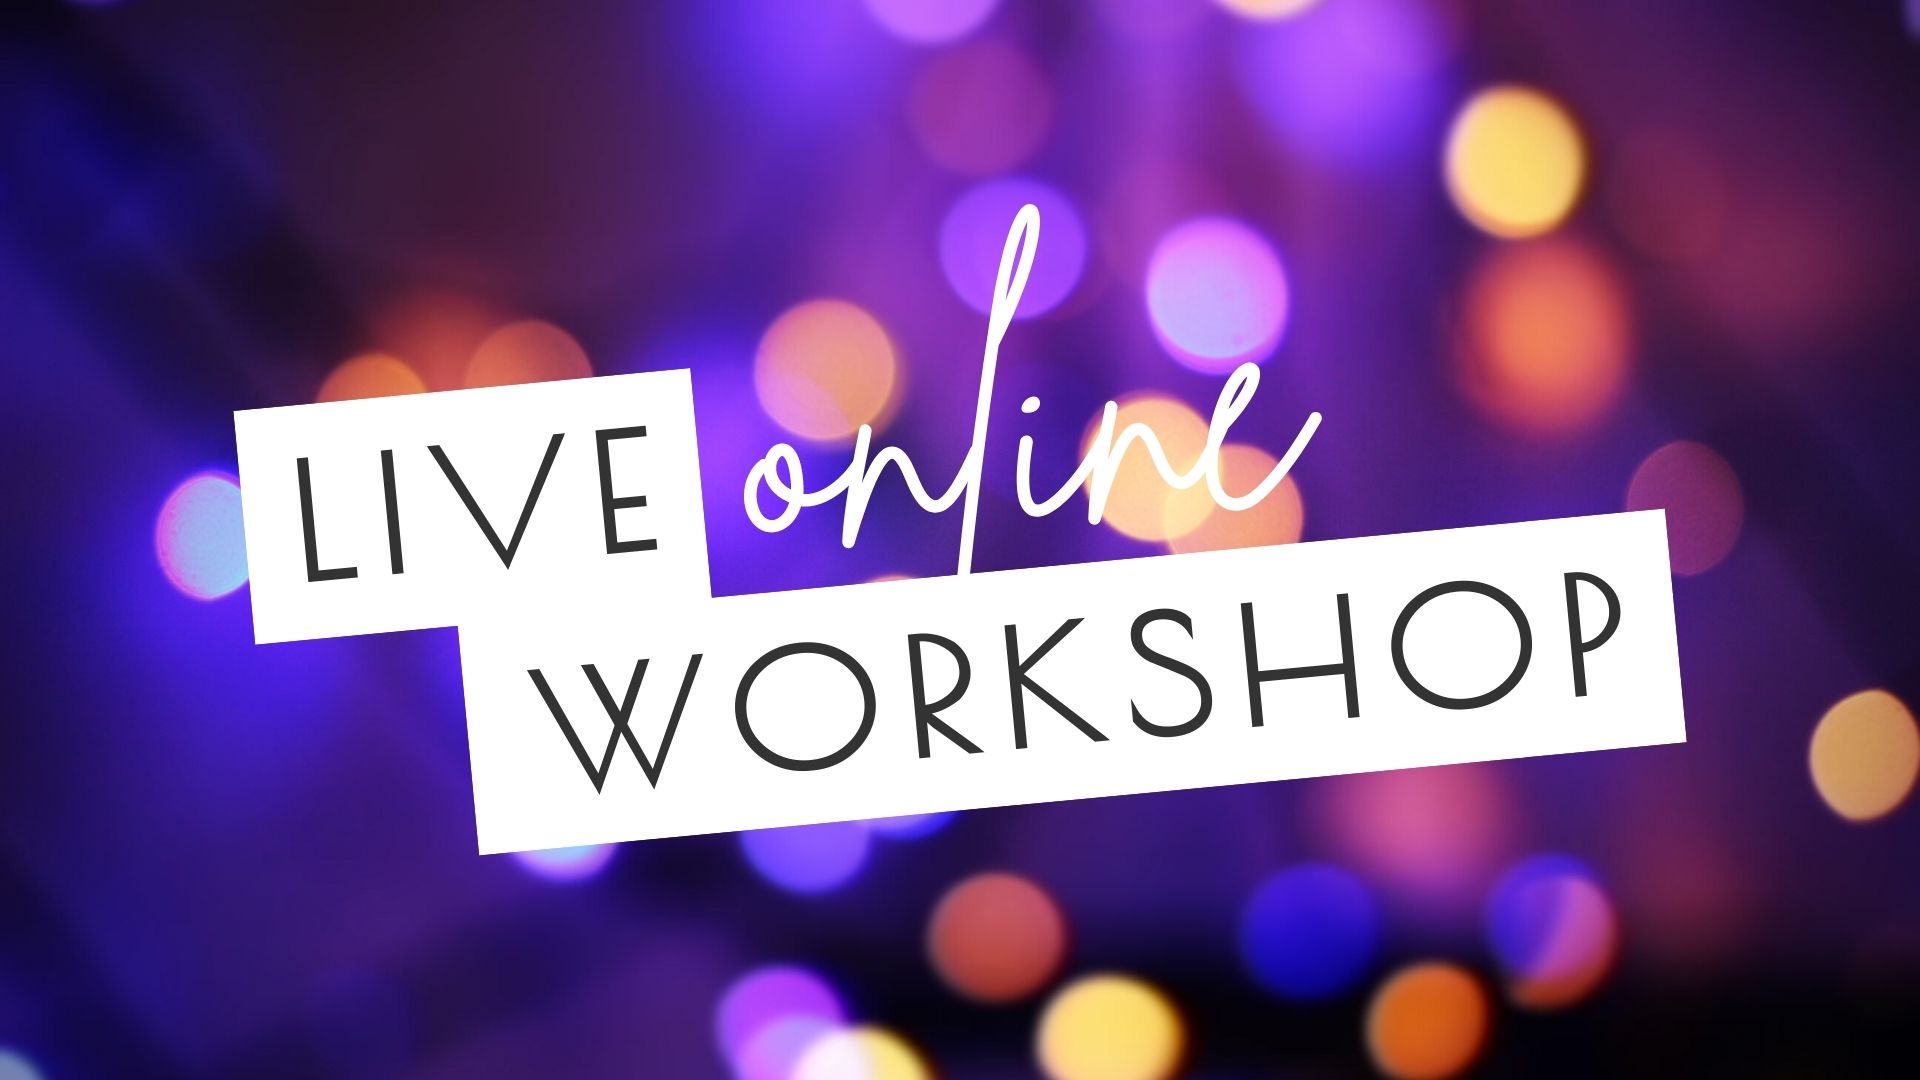 Online Workshop - Events - The Blues Room